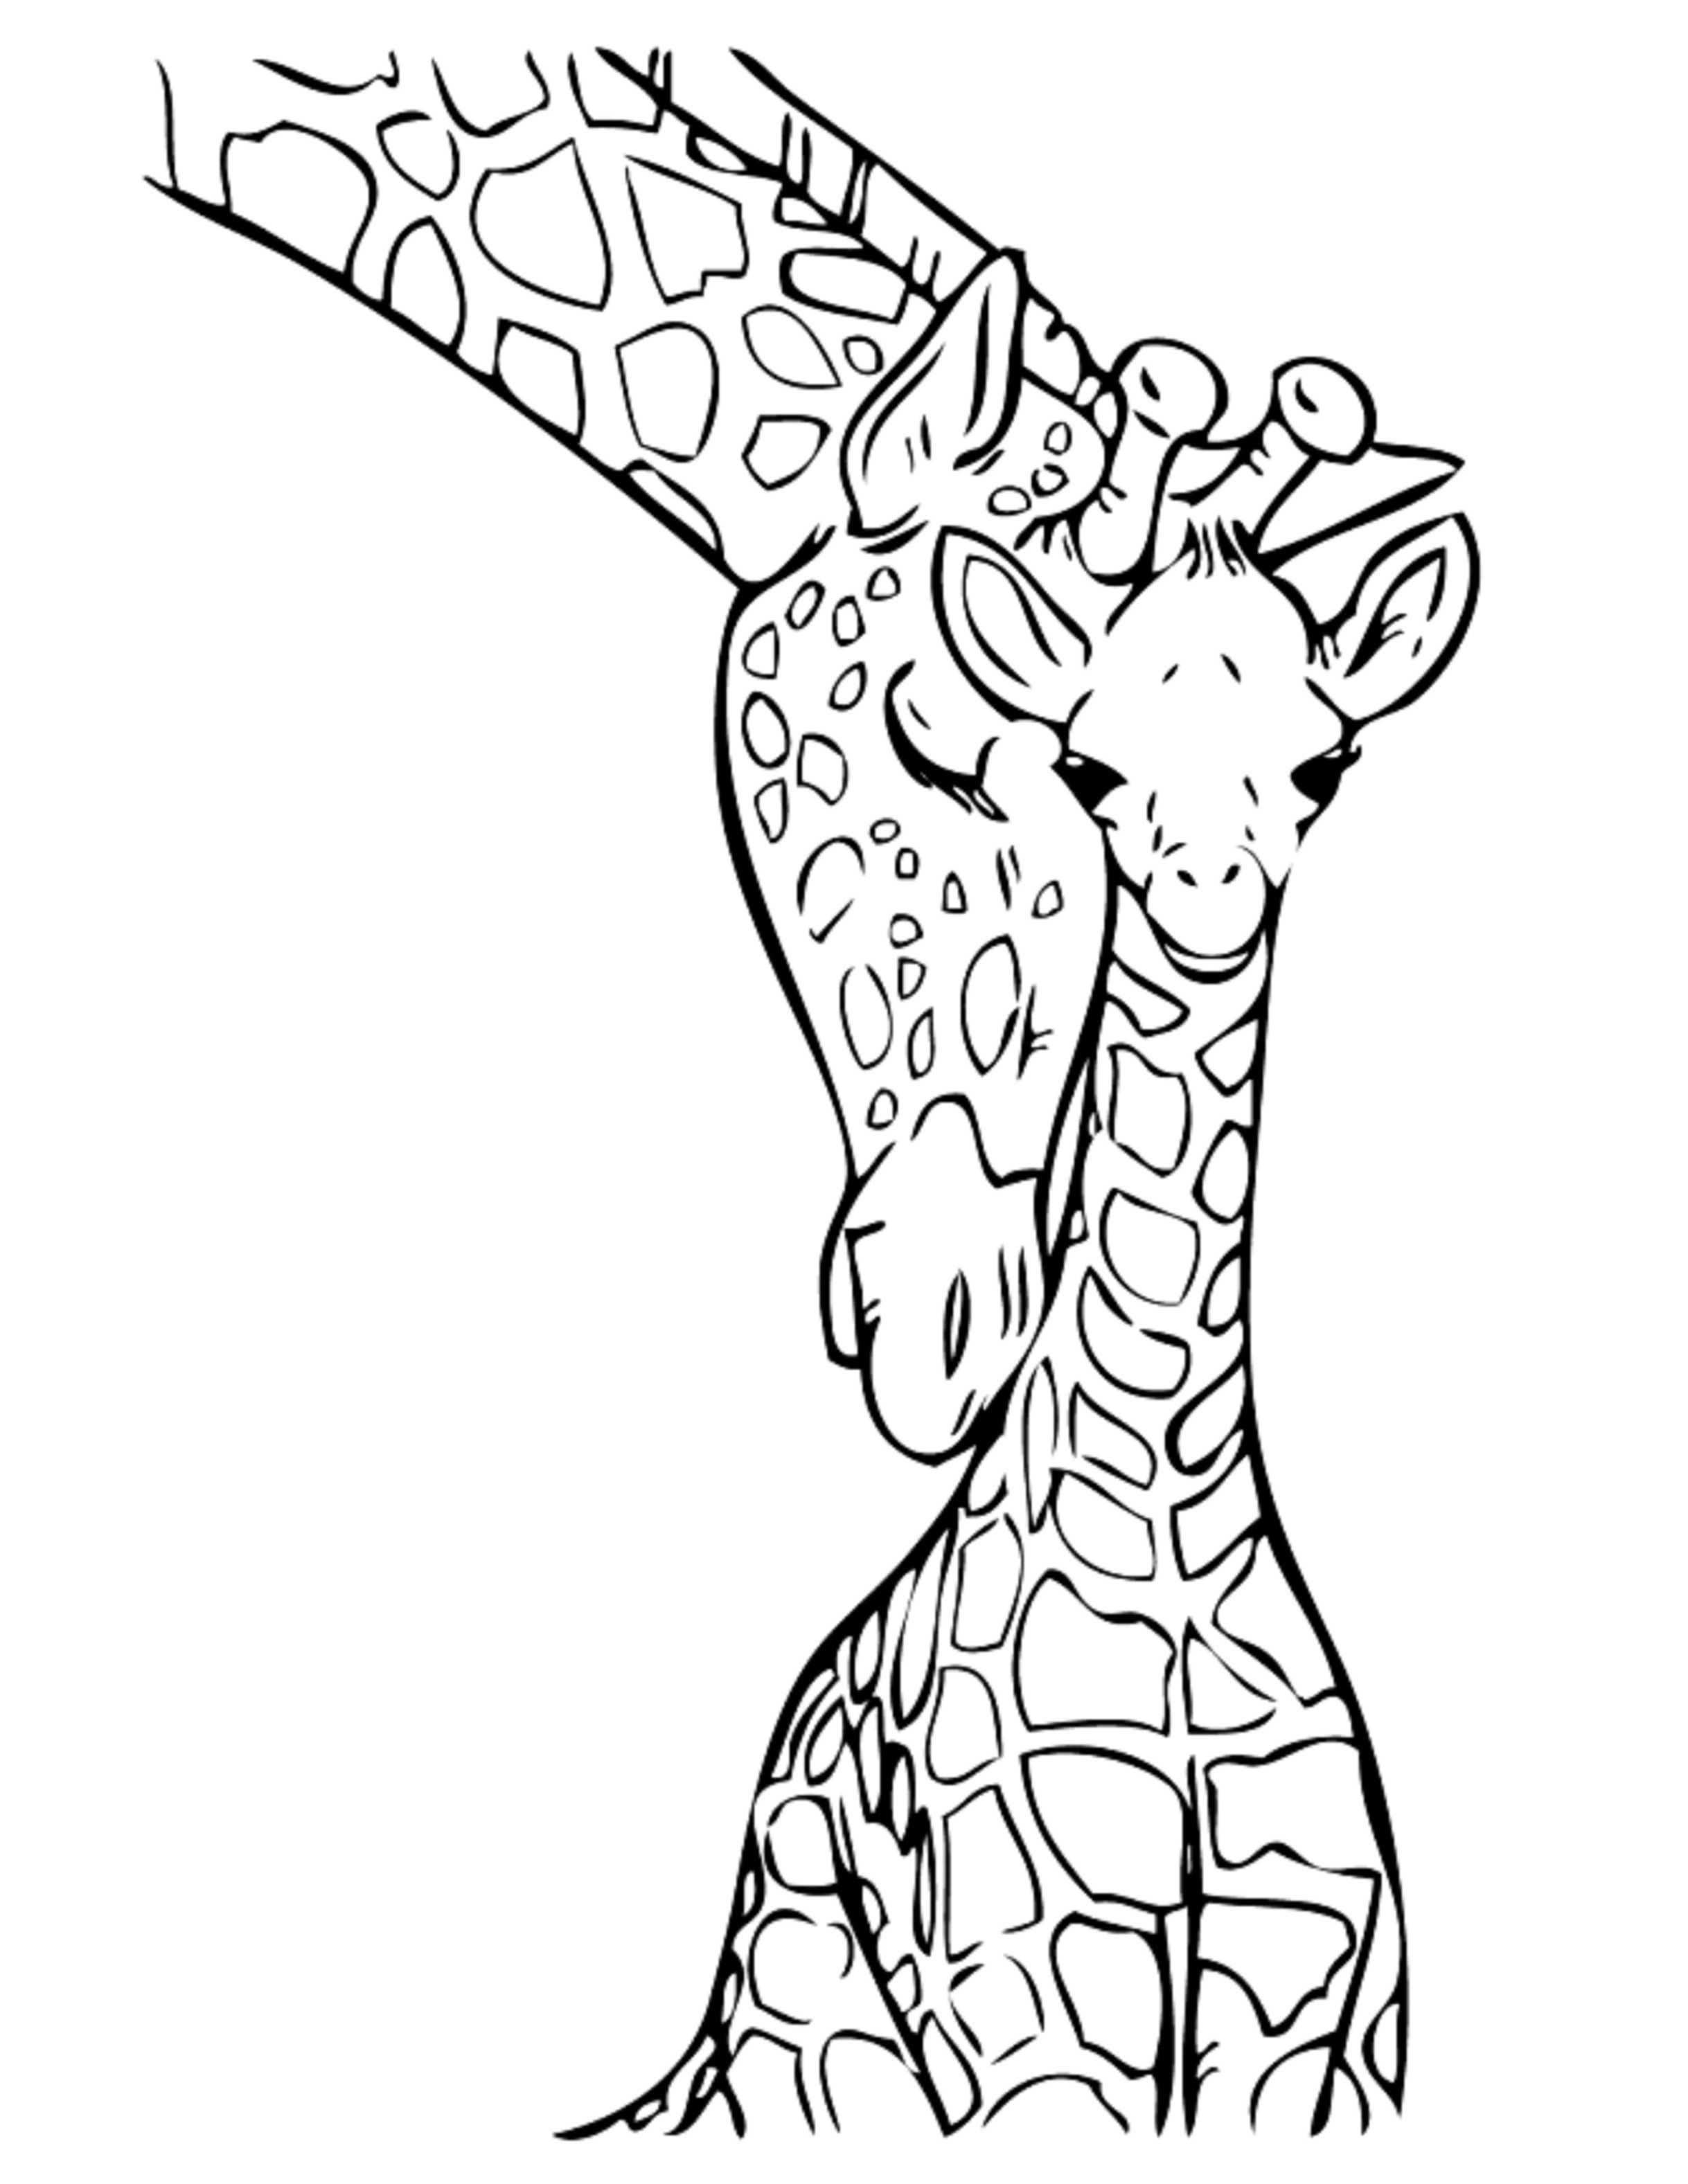 Animal Jam Coloring Pages Luxury Animal Jam Otter Coloring Page Monkey Halloween Bunn